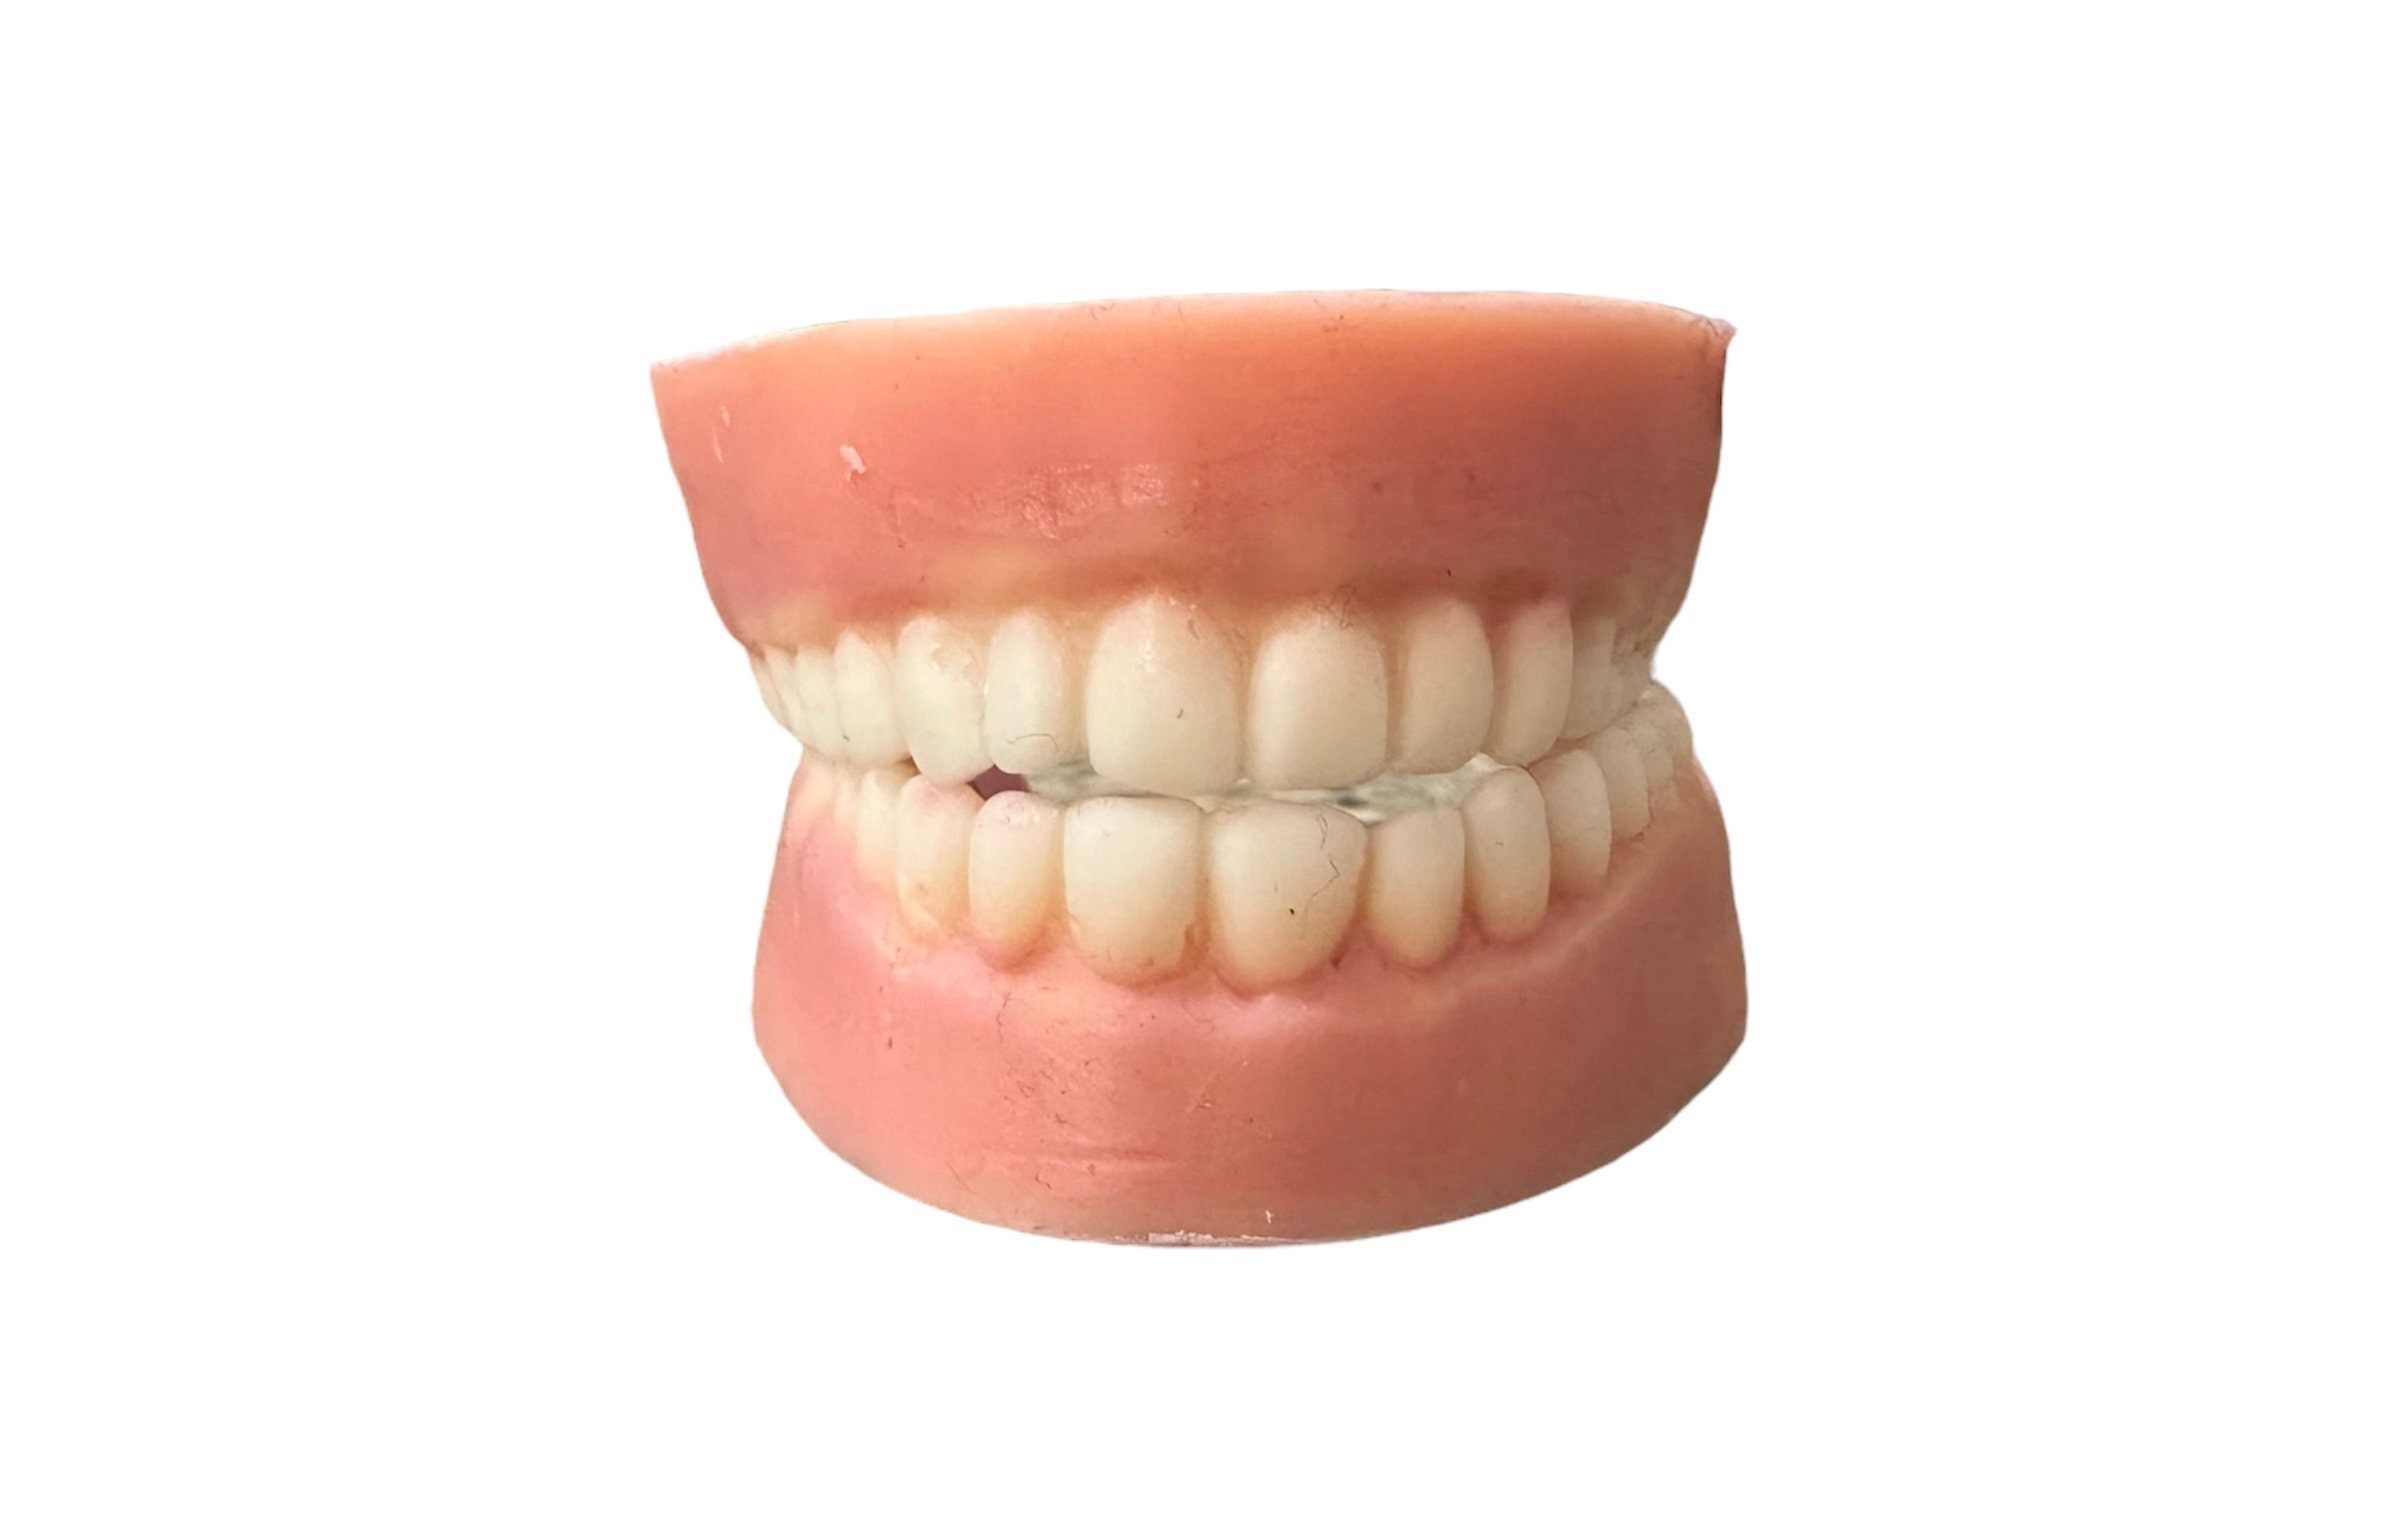 4 Sets Fake Teeth Dental Halloween Denture False Teeth Teeth Upper and  Lower Synthetic.Student Papers. Teeth for Halloween Party Replacement, 112